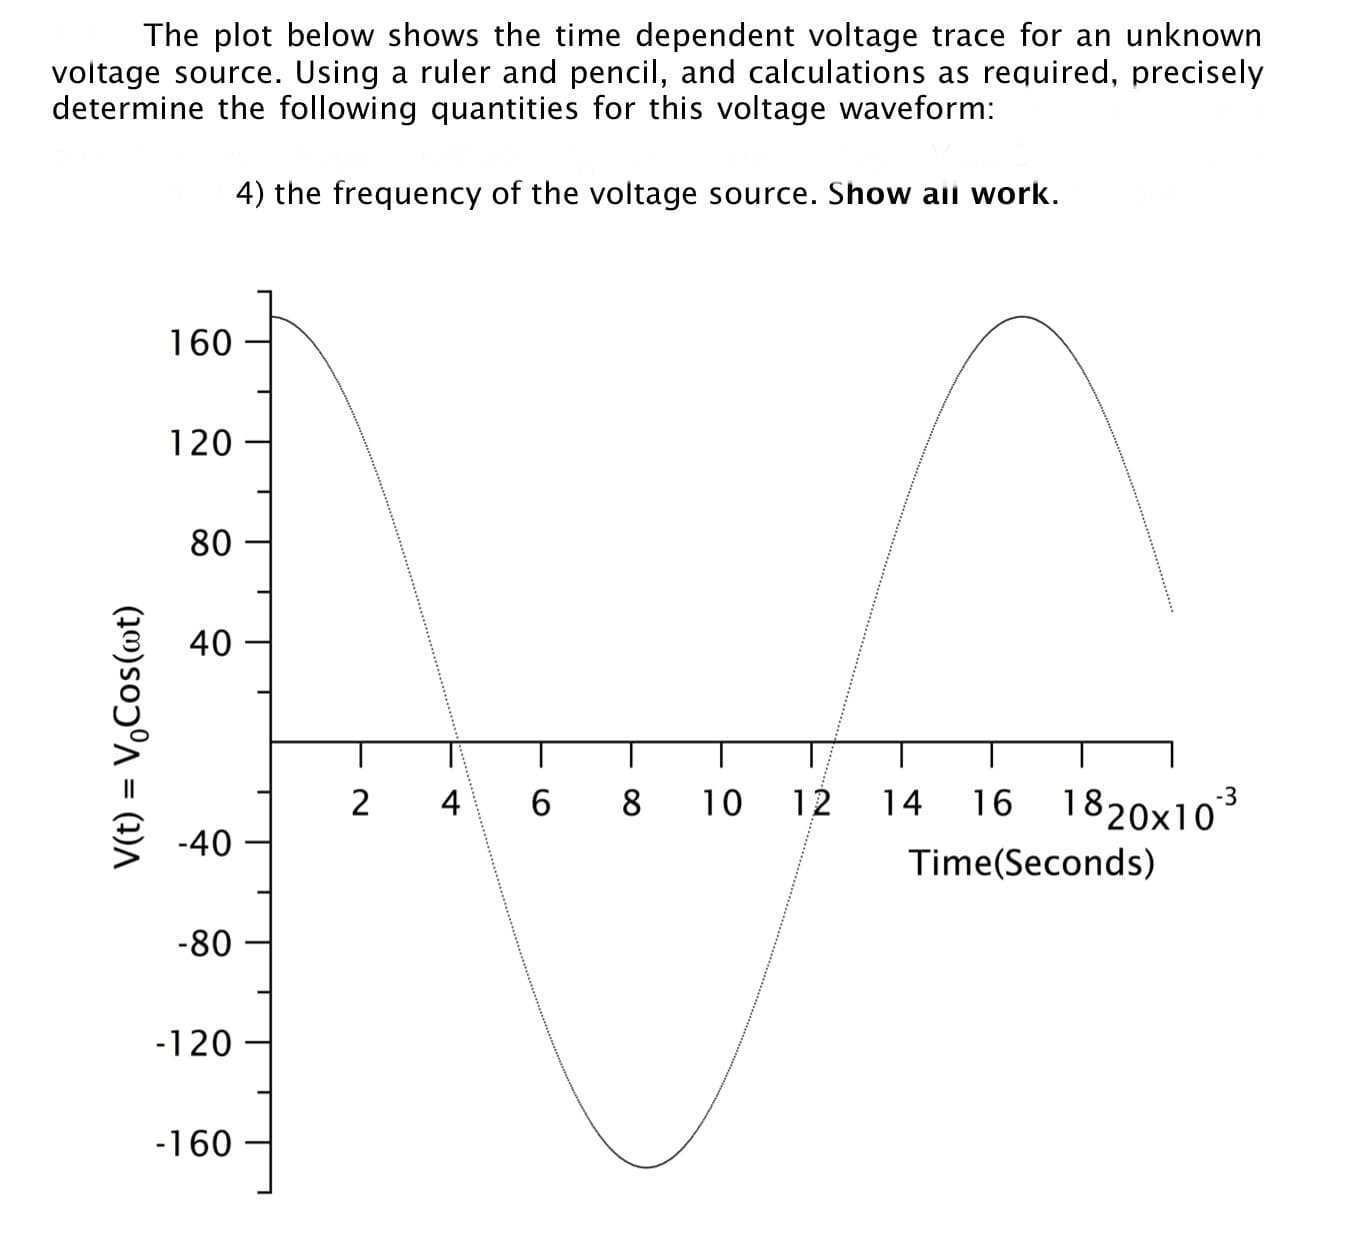 4) the frequency of the voltage source. Show aii work.
160
120
80
40
6 8
16 1820x10
4
10
12
14
-3
-40
Time(Seconds)
-80
-120
-160
(10)soɔ°A = (1)A
